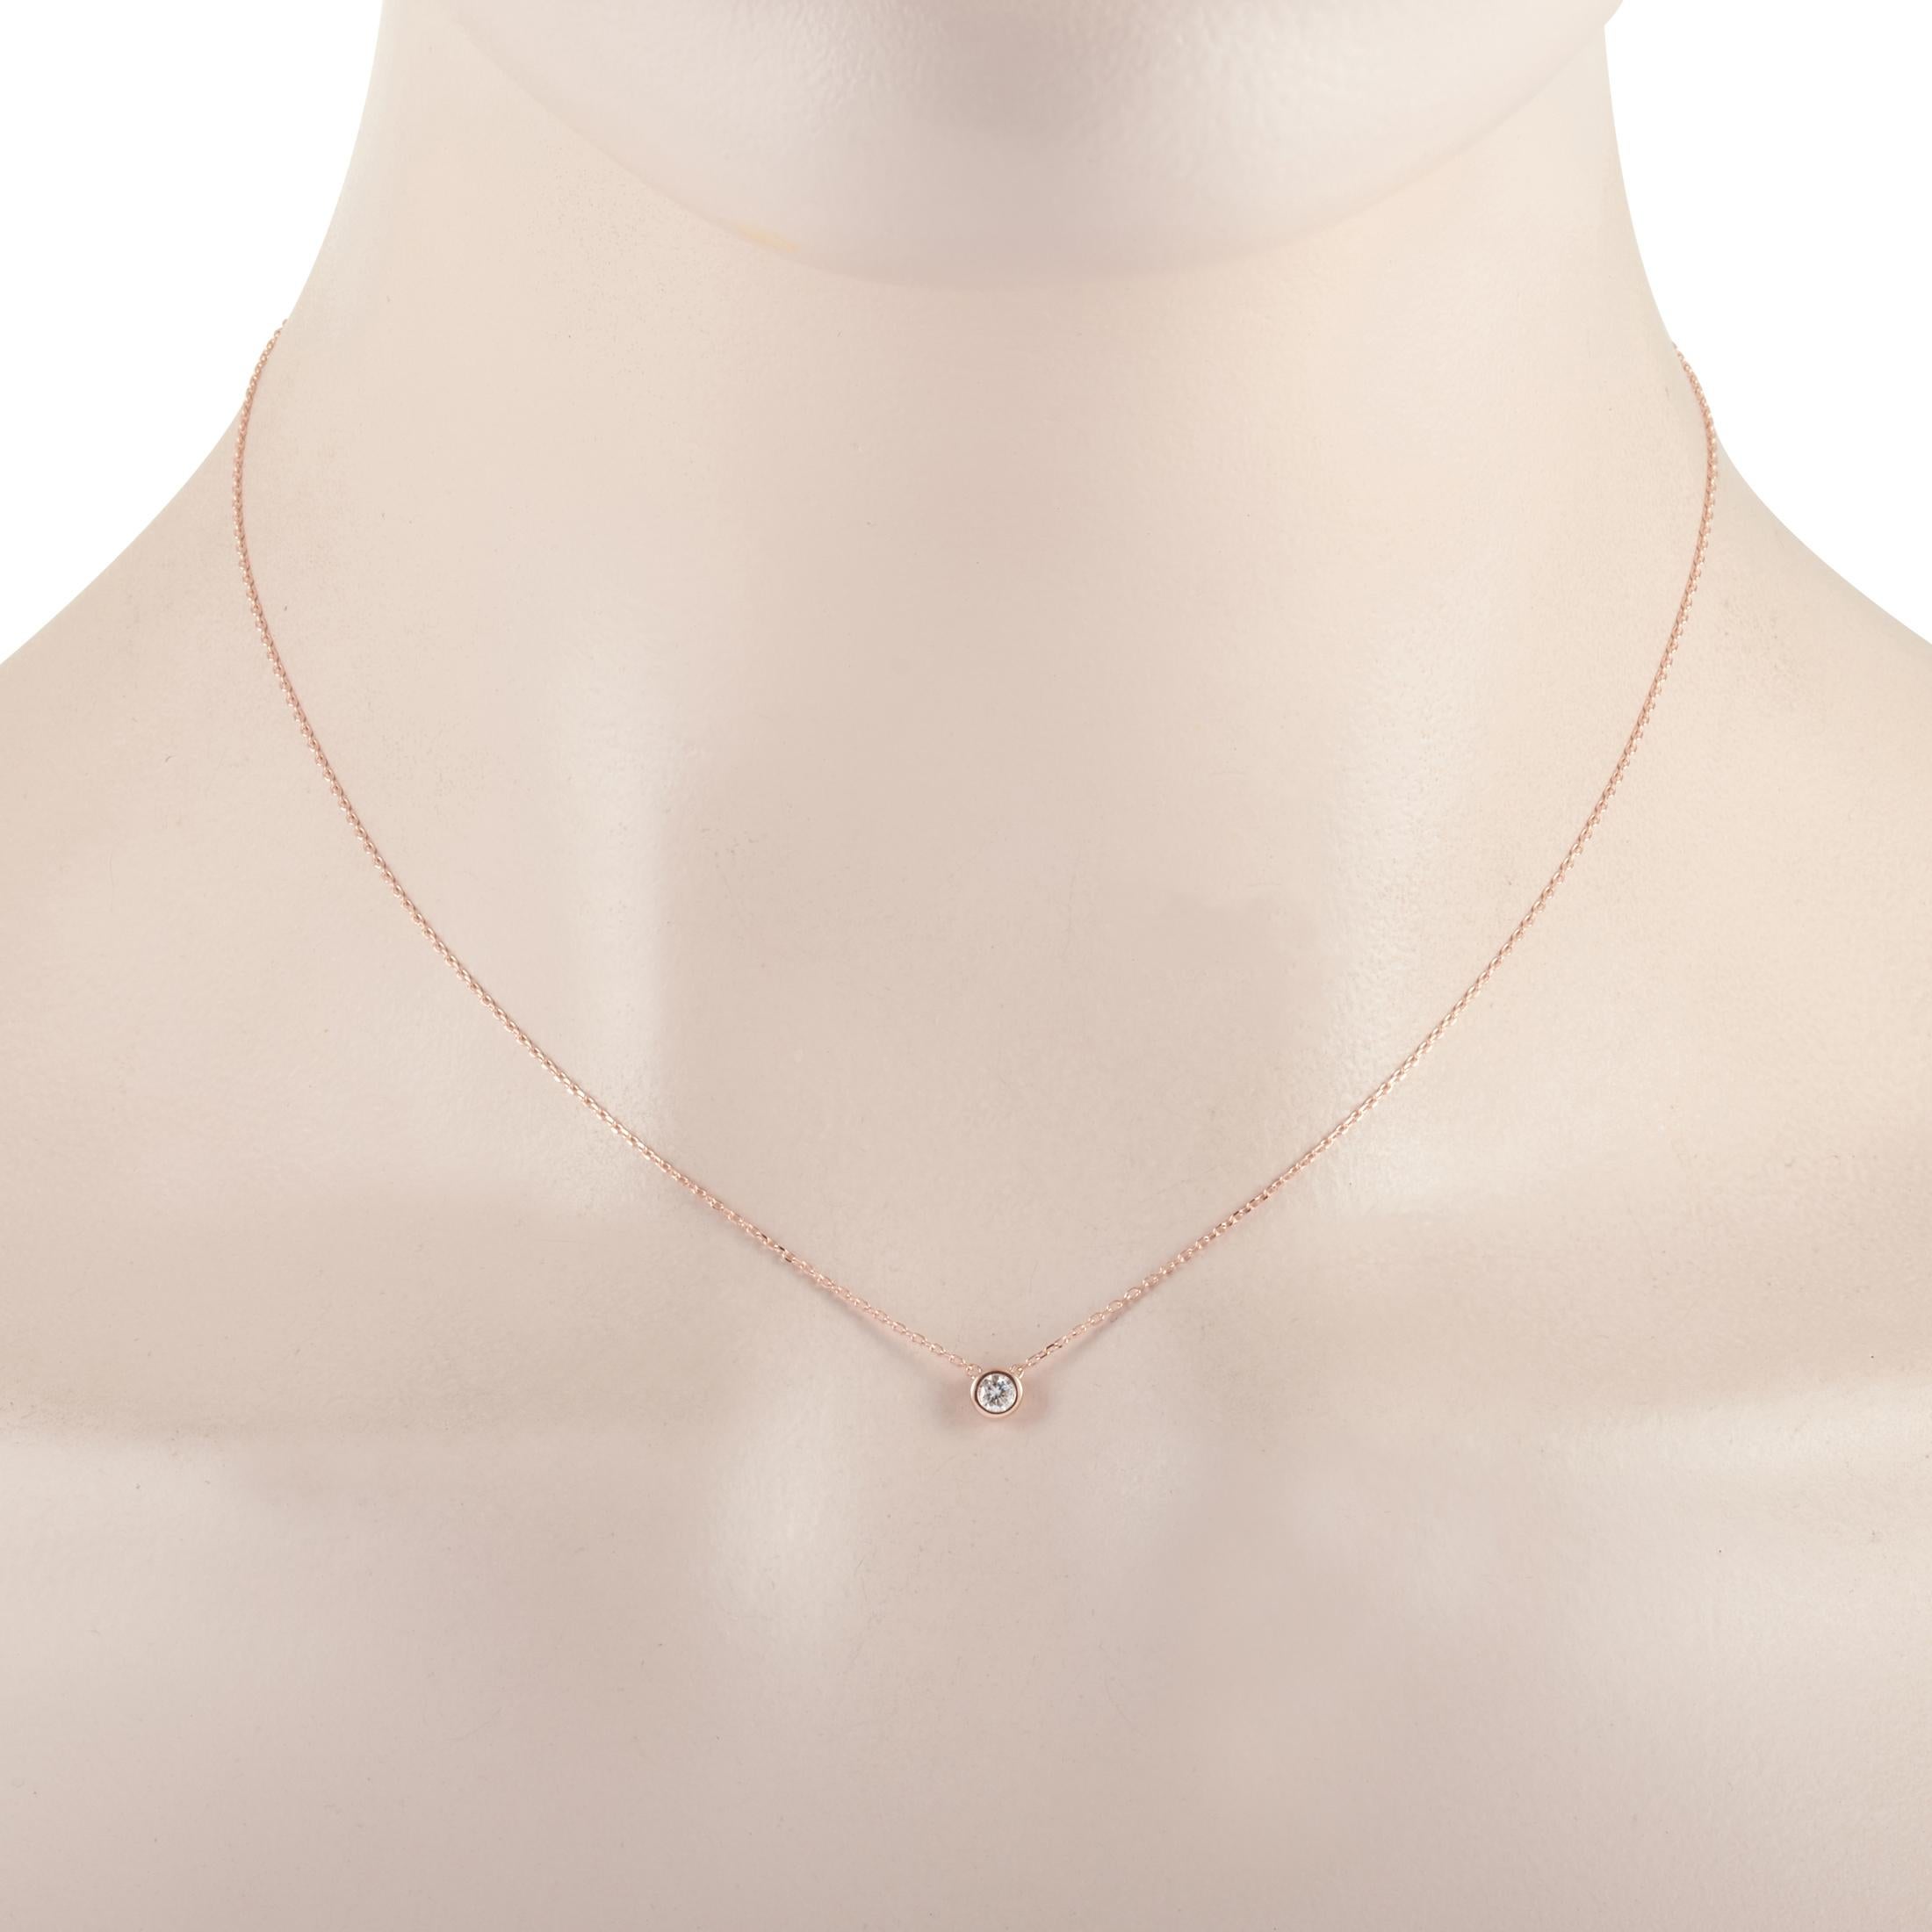 This LB Exclusive necklace is made of 14K rose gold and embellished with a 0.11 ct diamond stone. The necklace weighs 1.3 grams and boasts a 15” chain and a pendant that measures 0.19” in length and 0.19” in width.
 
 Offered in brand new